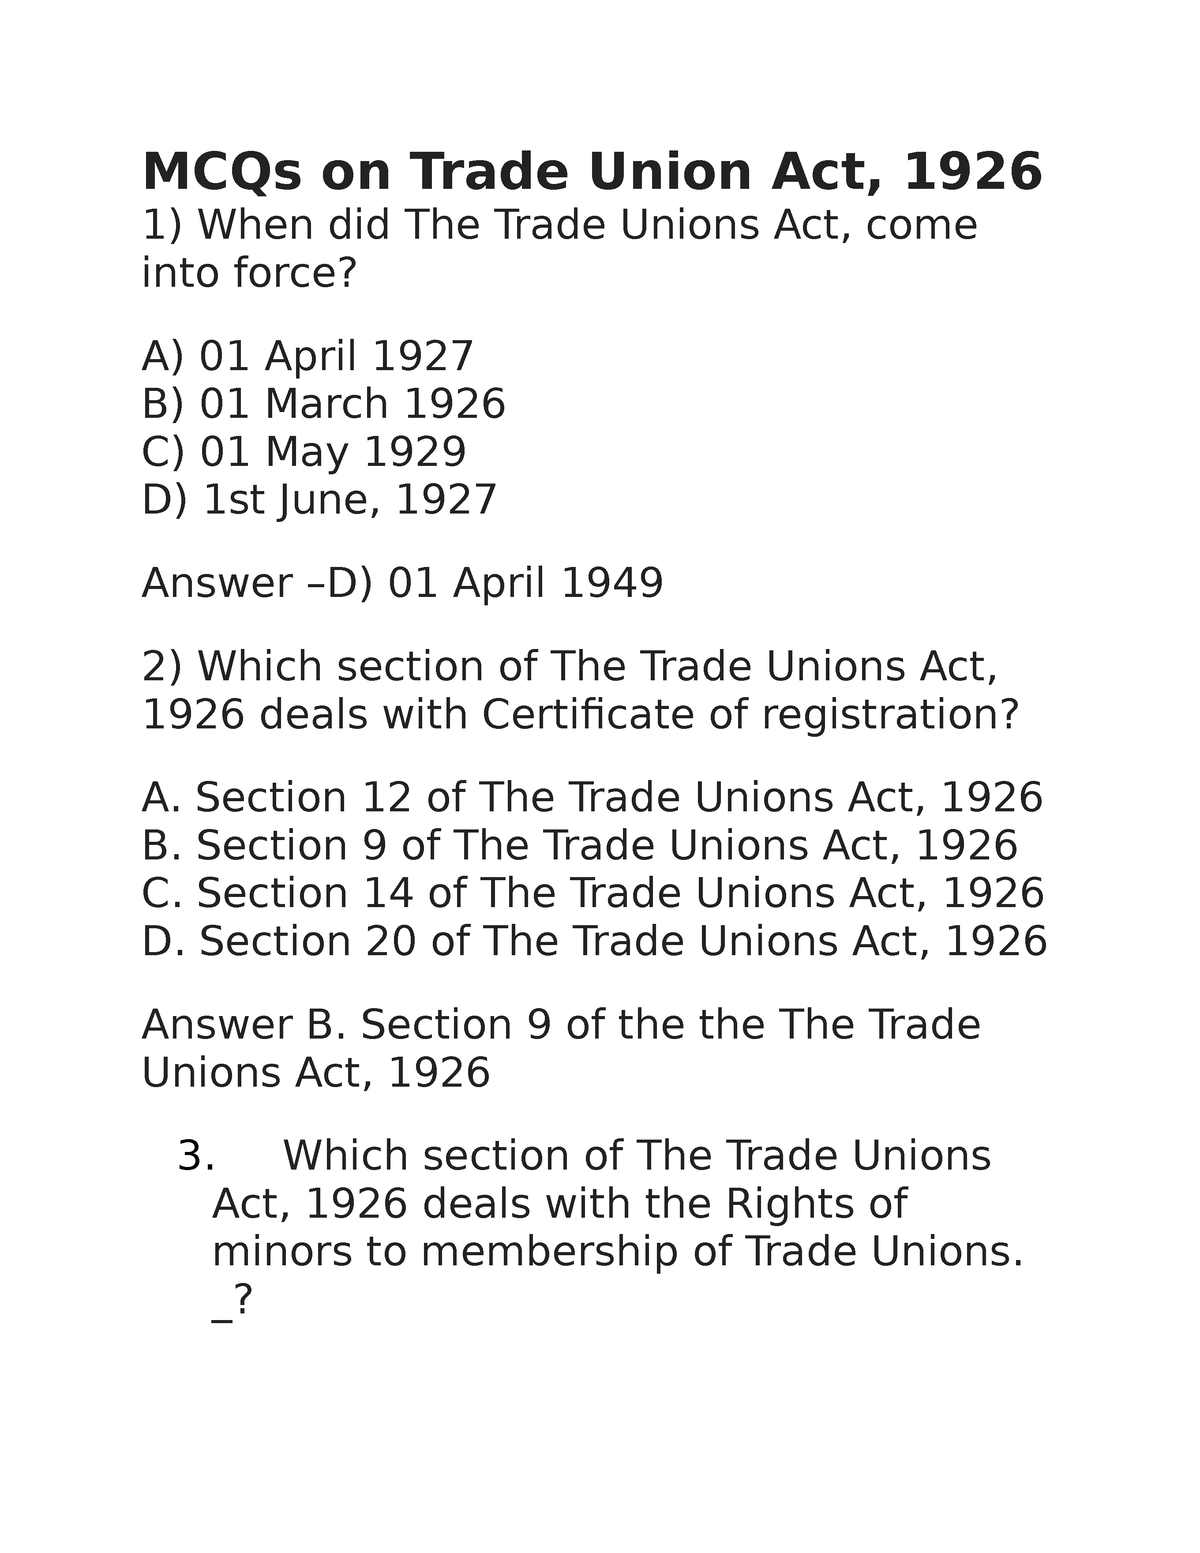 literature review of trade union